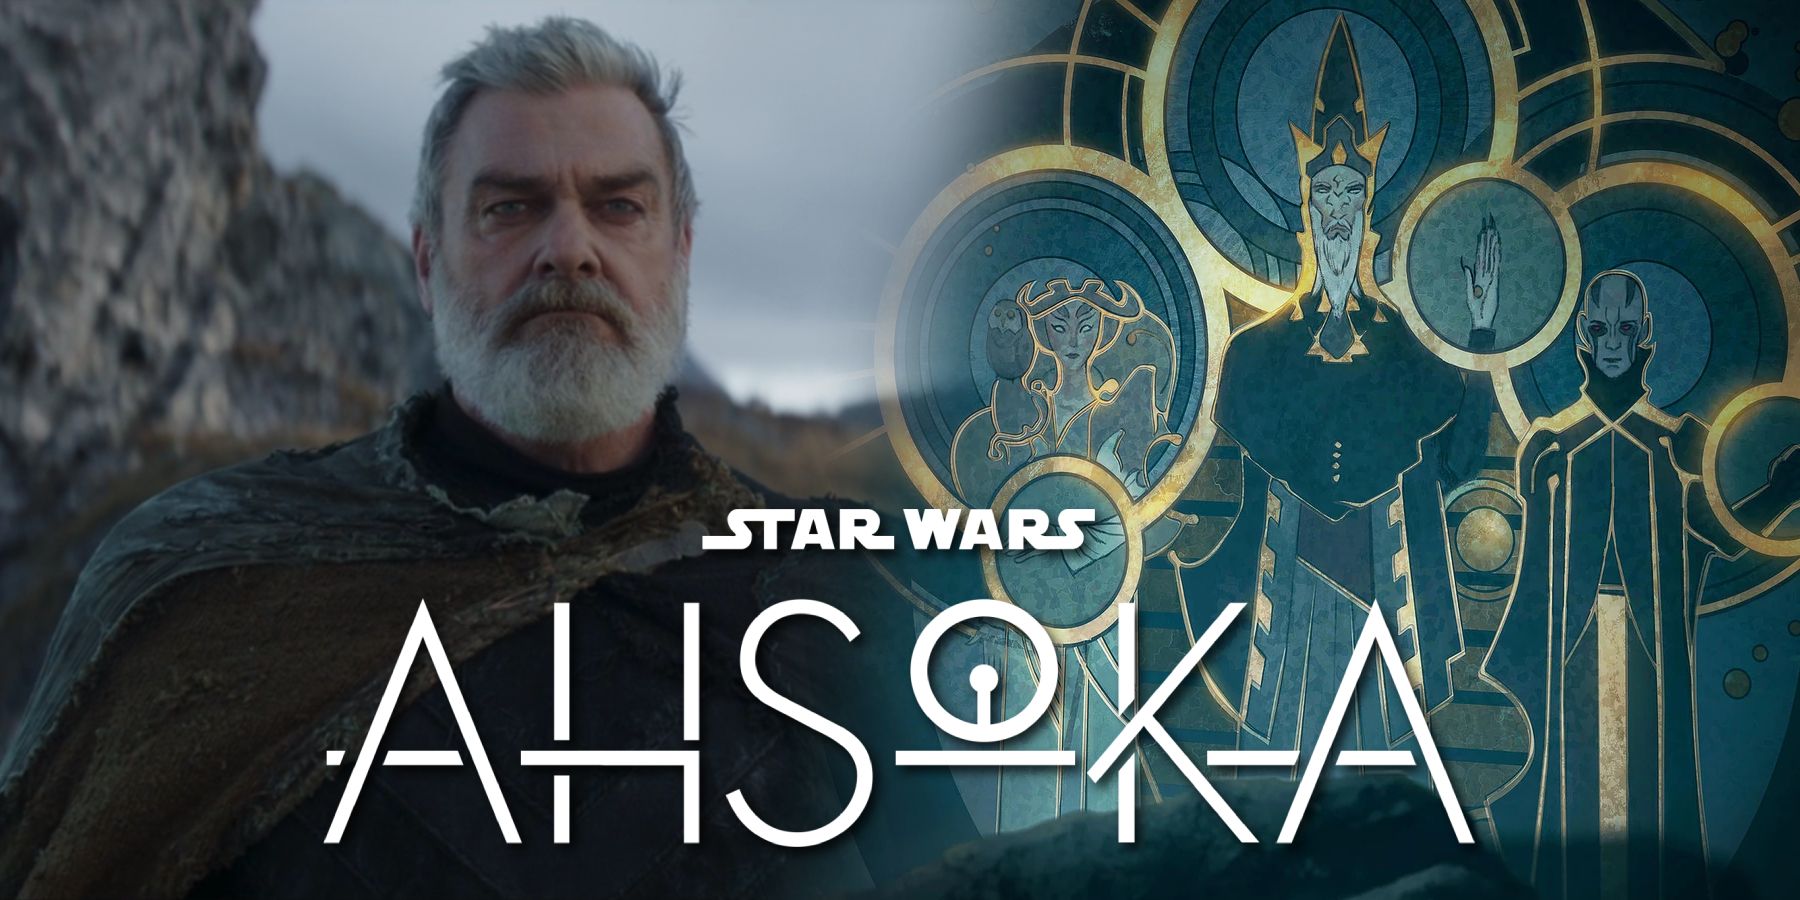 Ray Stevenson as Baylan Skoll on the Star Wars series Ahsoka next to a painting of the Father, the Son, and the Daughter